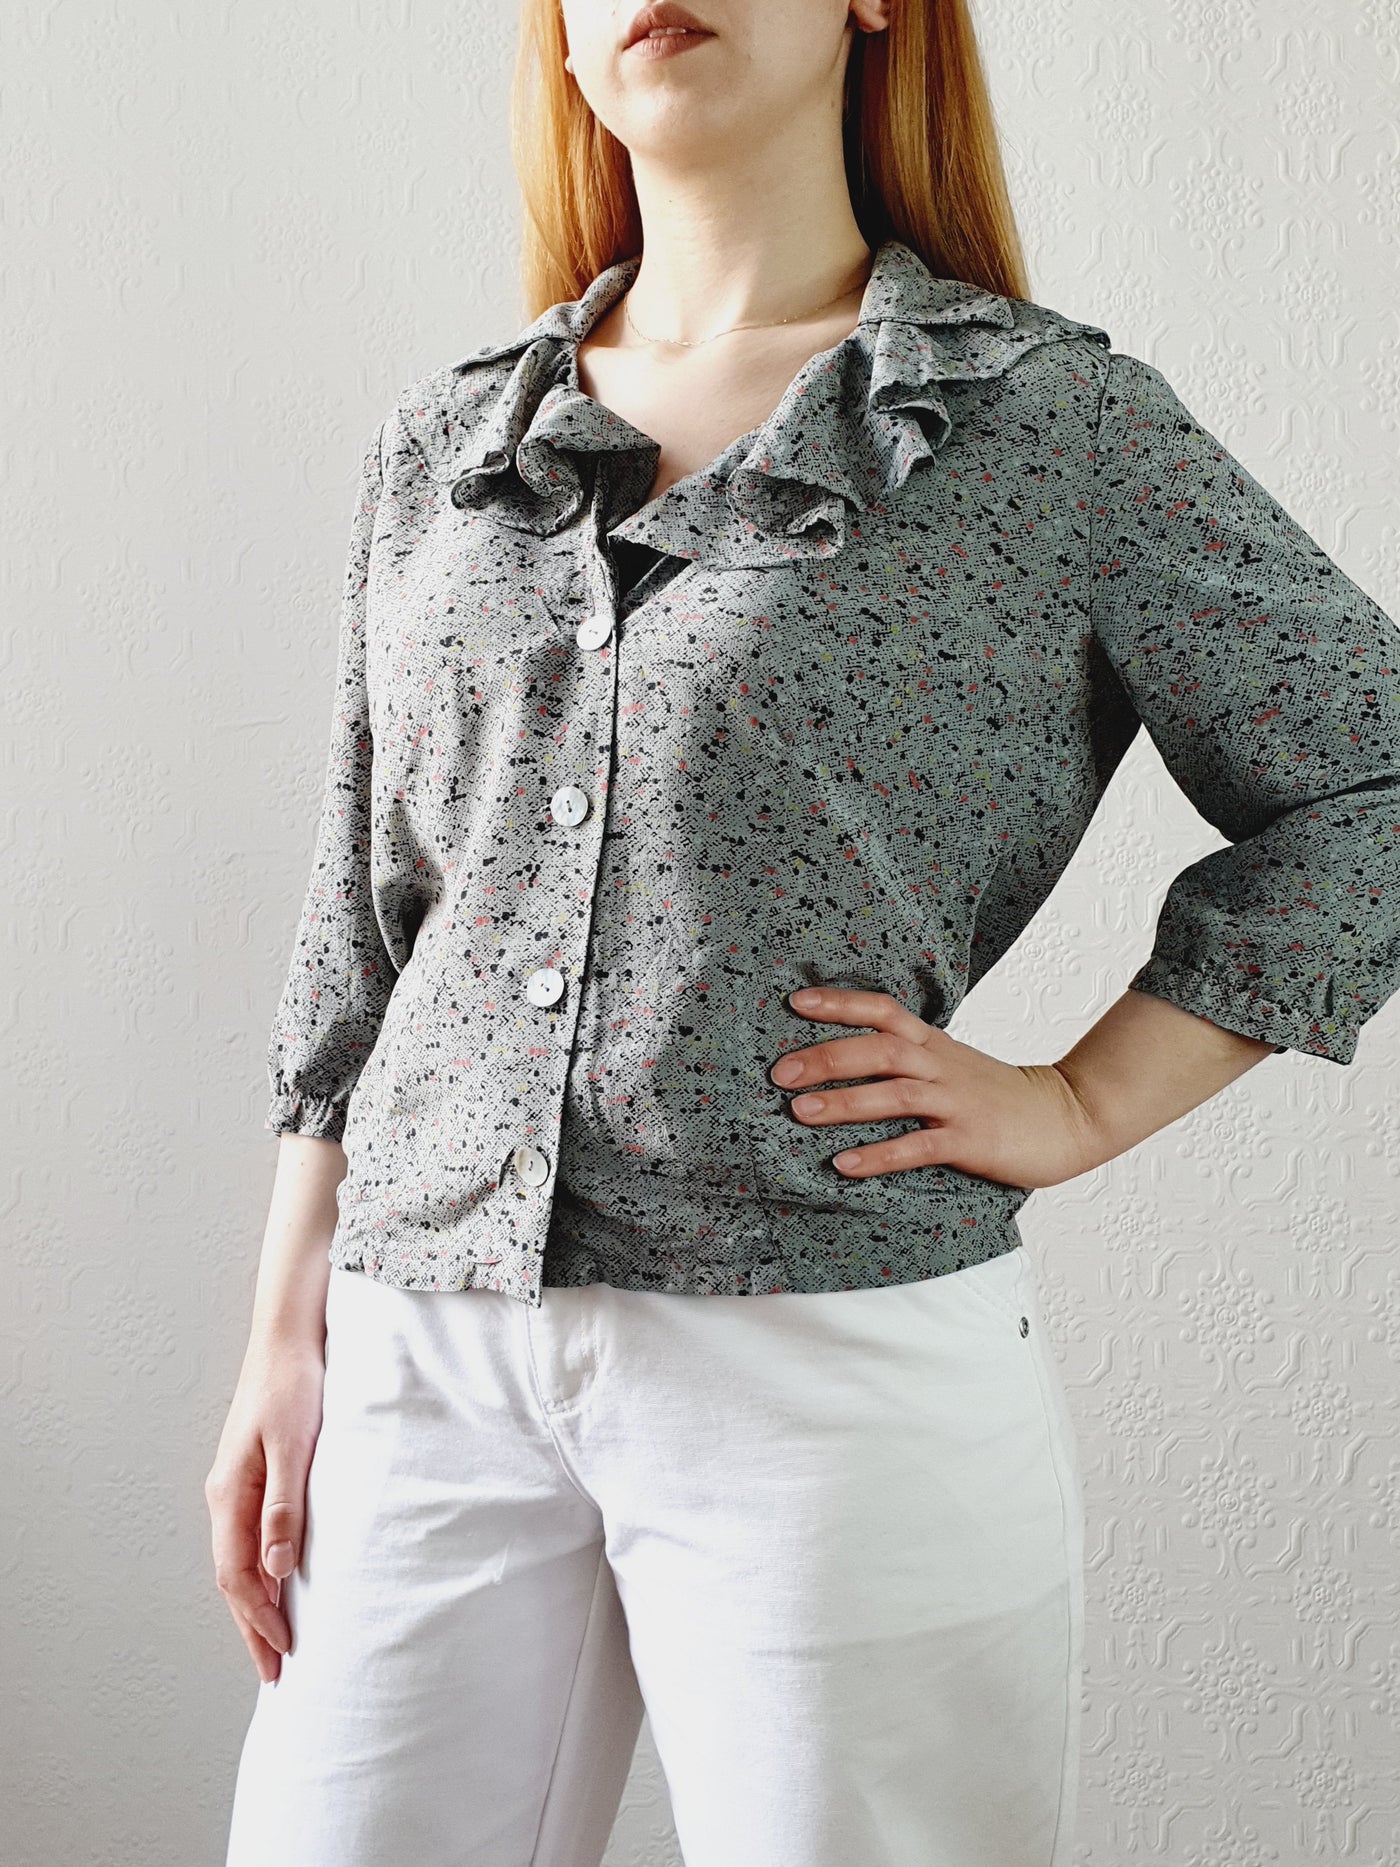 Vintage Speckled Blouse with Ruffled Collar • S-M